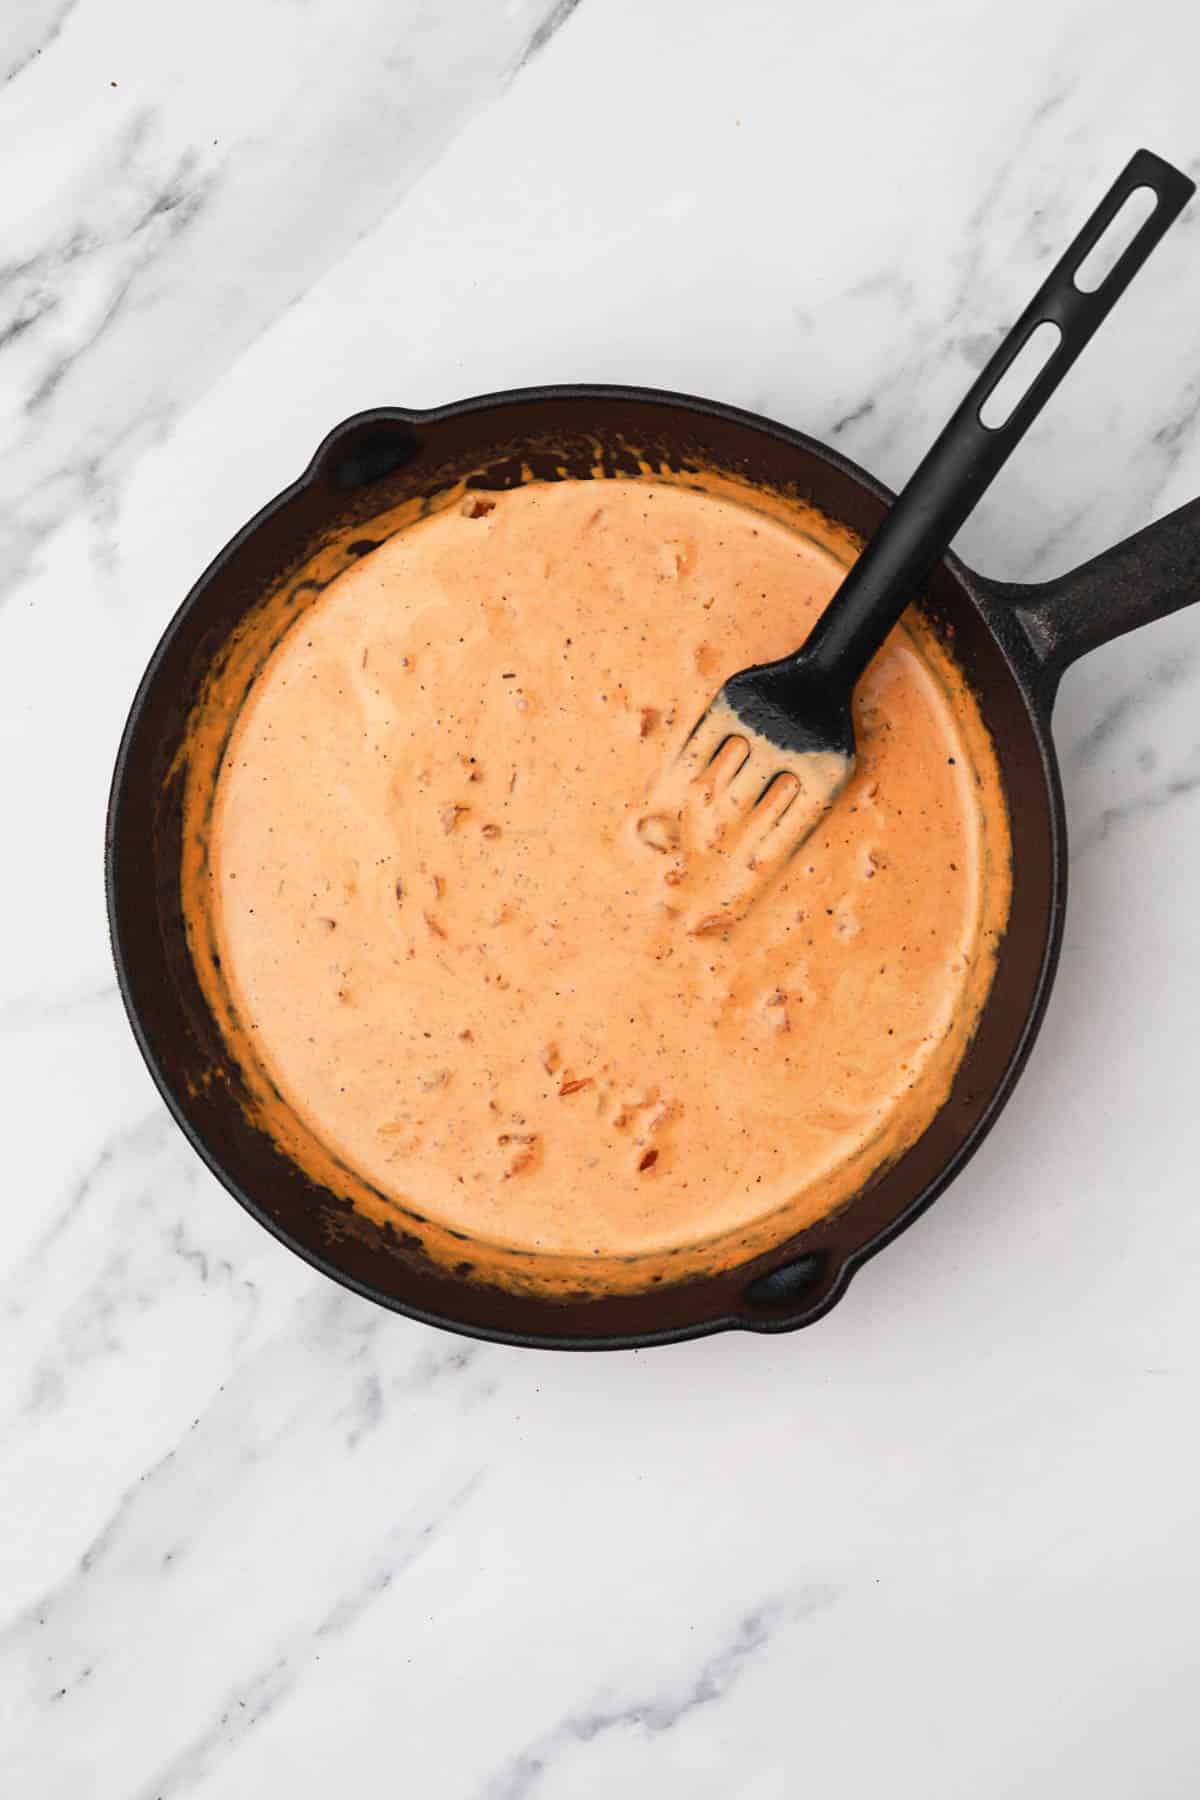 the creamy sauce in the skillet.